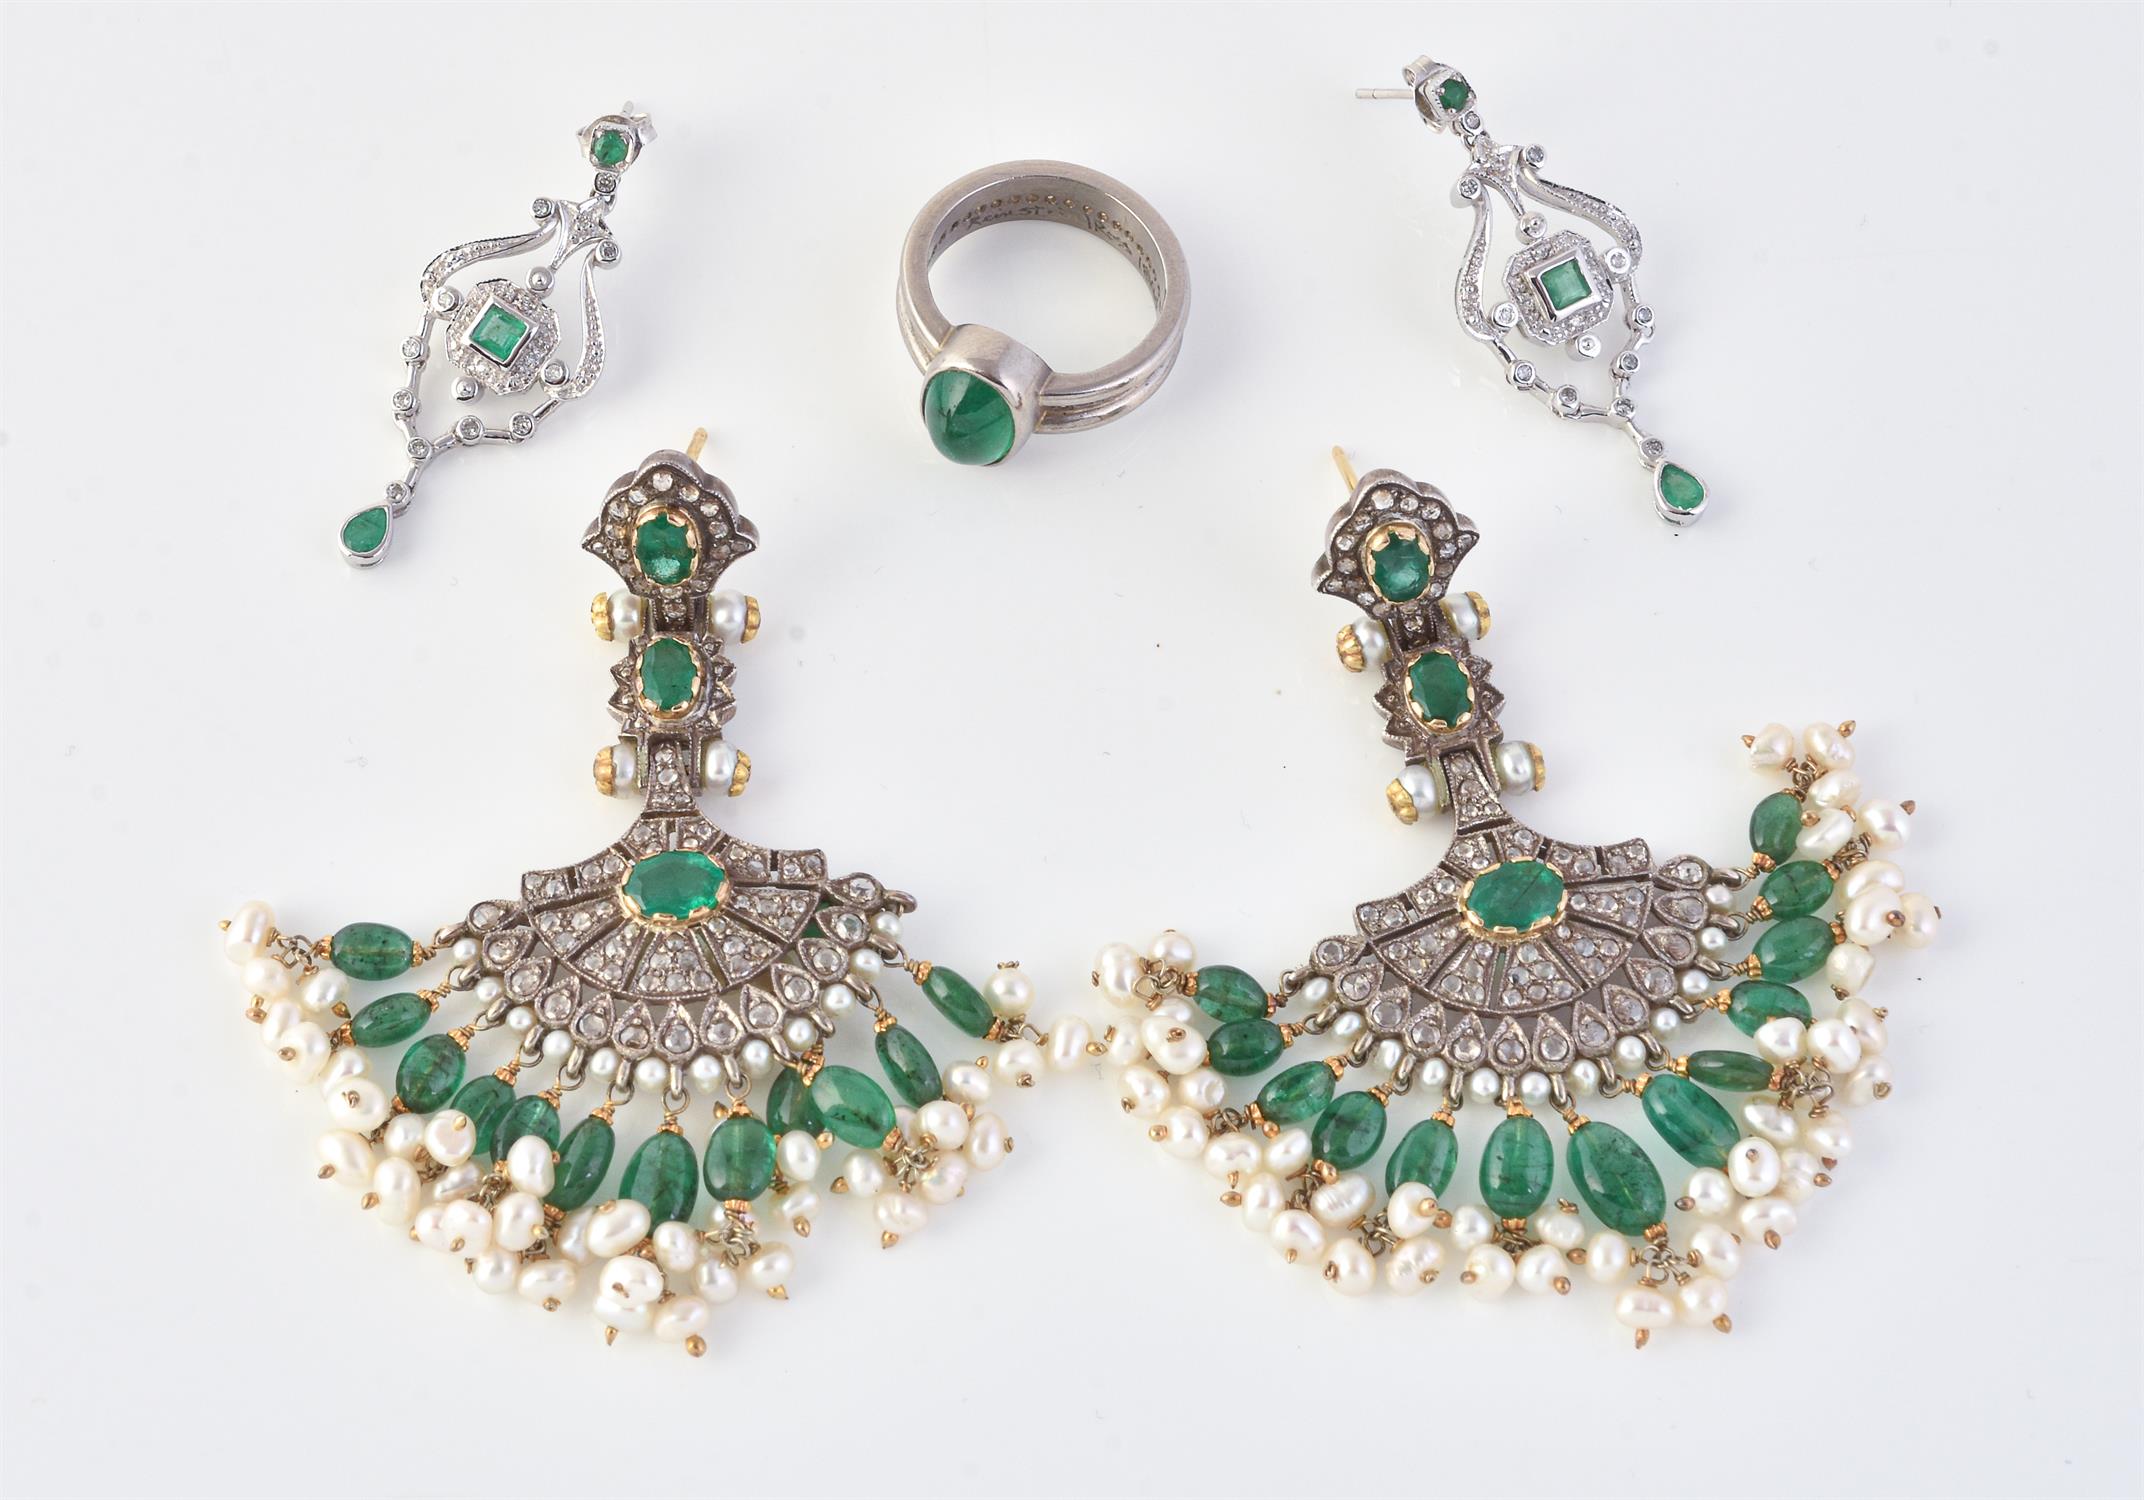 A pair of emerald, freshwater cultured pearl and diamond chandelier earrings